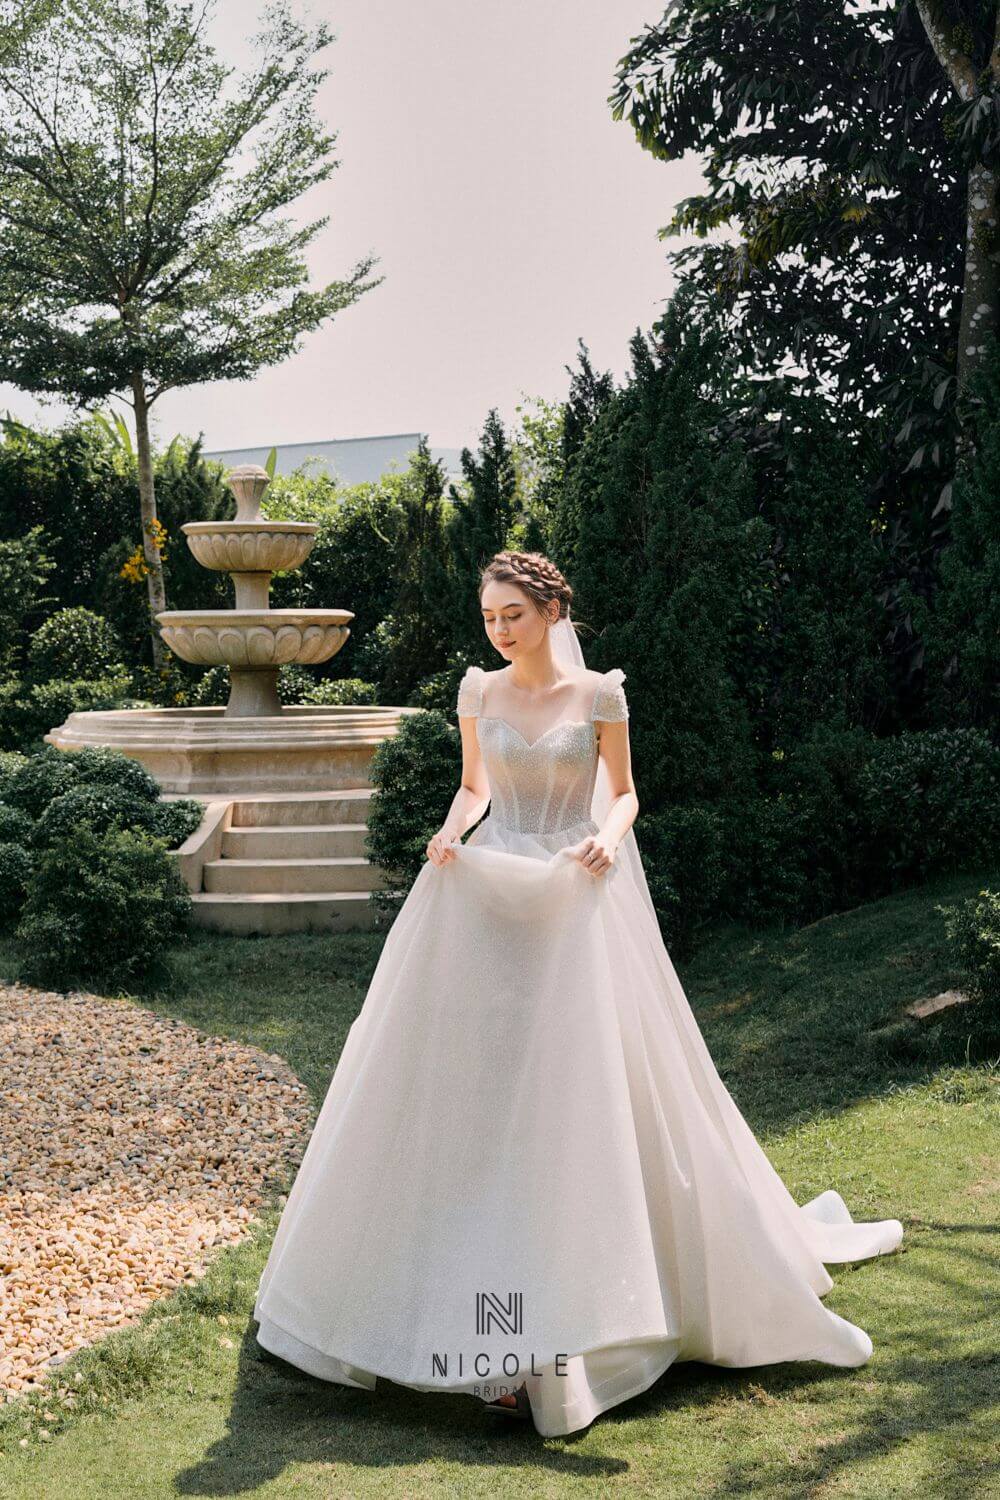 The most gorgeous wedding gown 🥹💍👰‍♀️ | Gallery posted by gisellej |  Lemon8